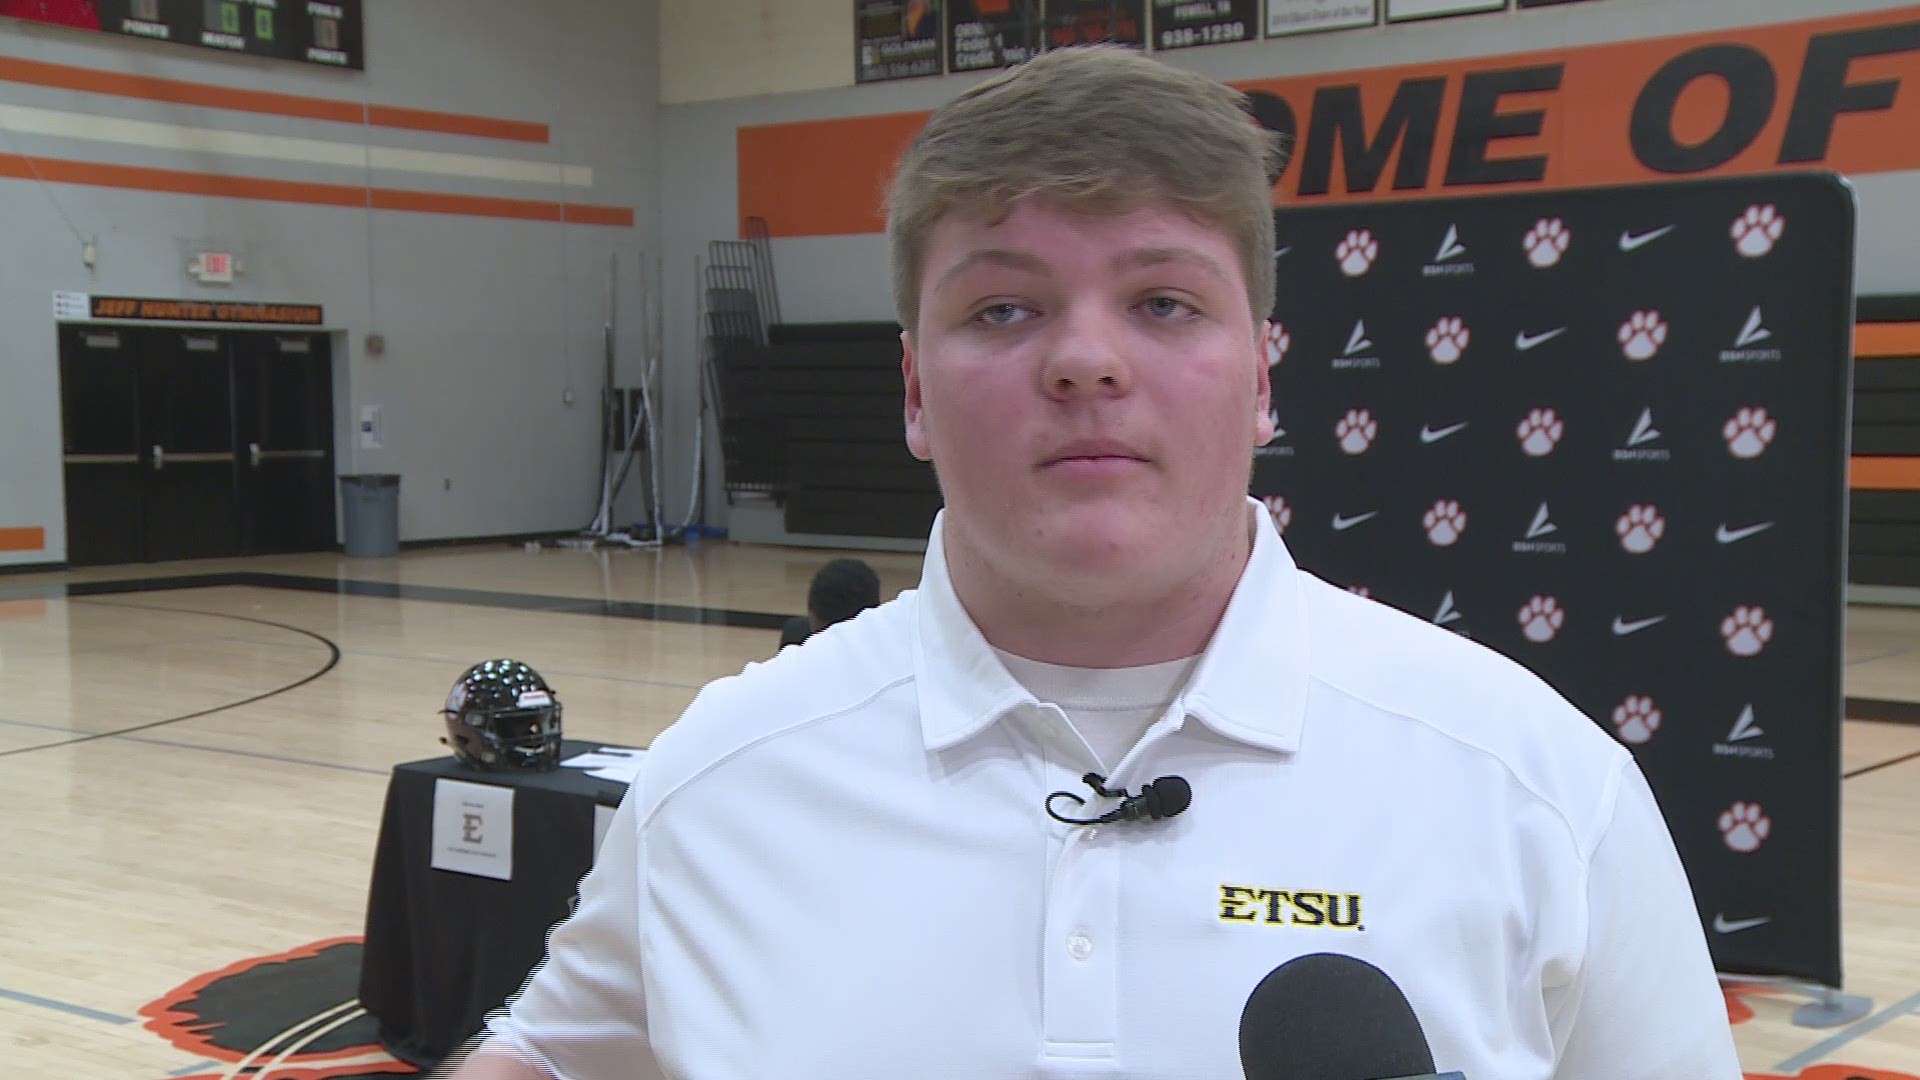 Ballinger will be heading to ETSU. He says a big reason why he loves football is because his father is a coach. It helped make the game a part of him.